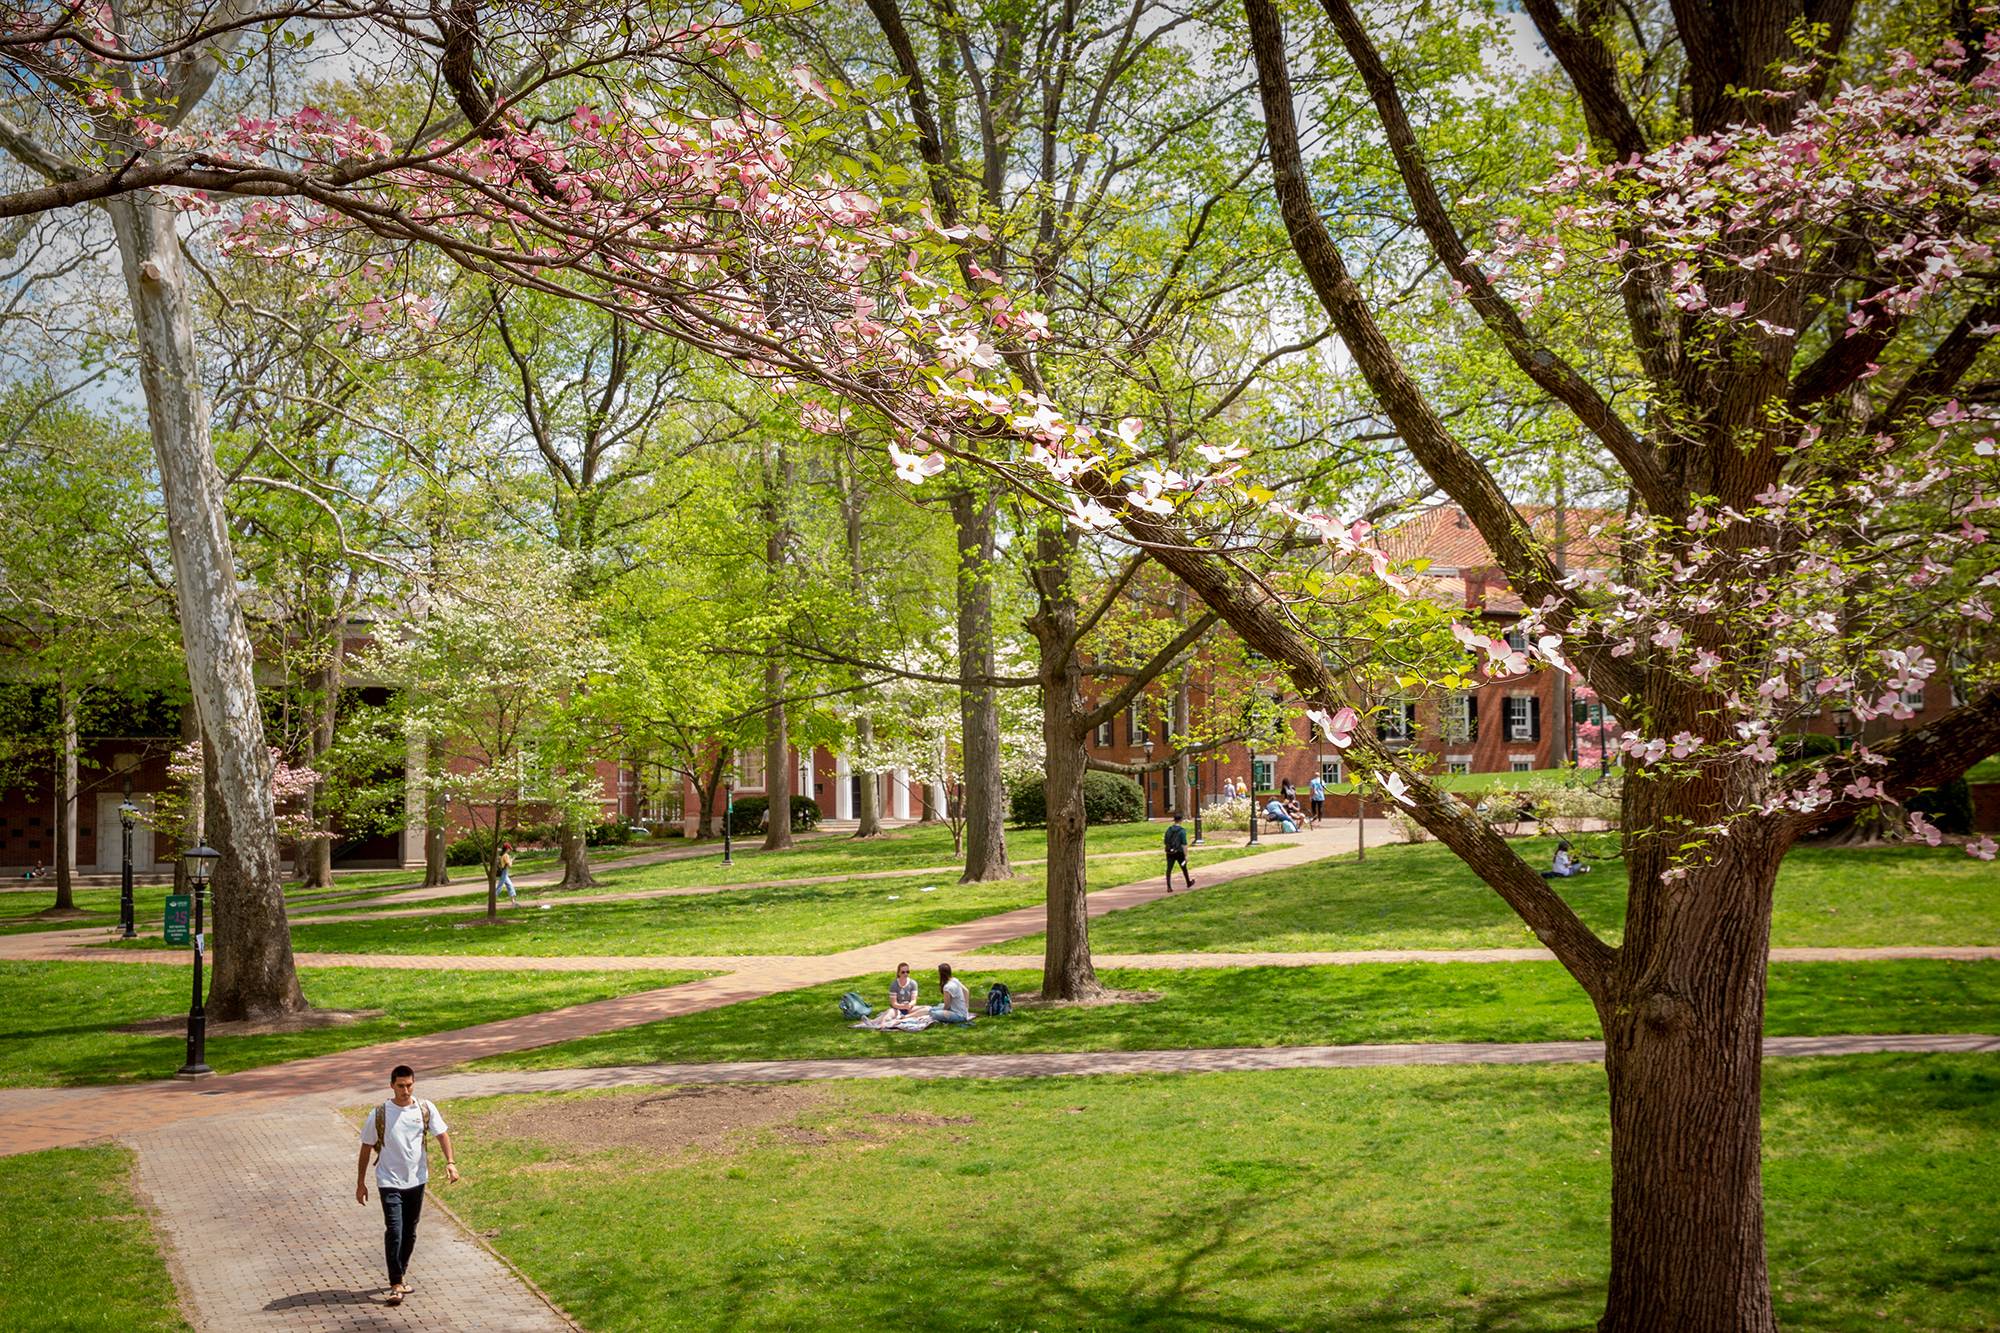 Ohio University ranked first in the state for Best College Campus by